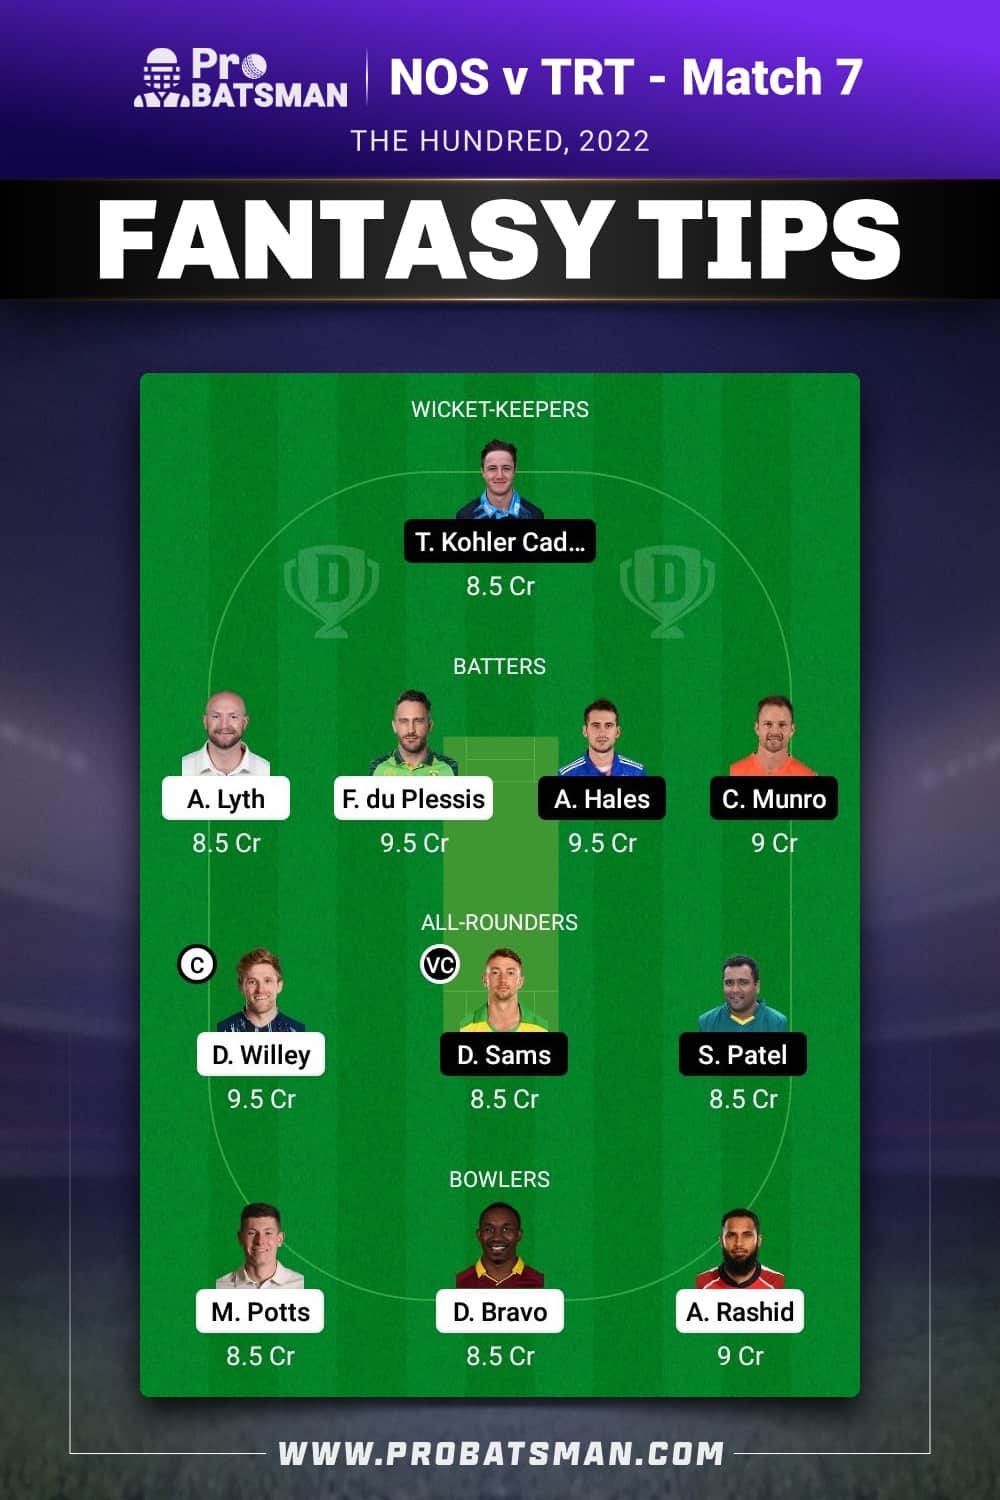 NOS vs TRT Dream11 Prediction With Stats, Pitch Report & Player Record of The Hundred, 2022 For Match 7